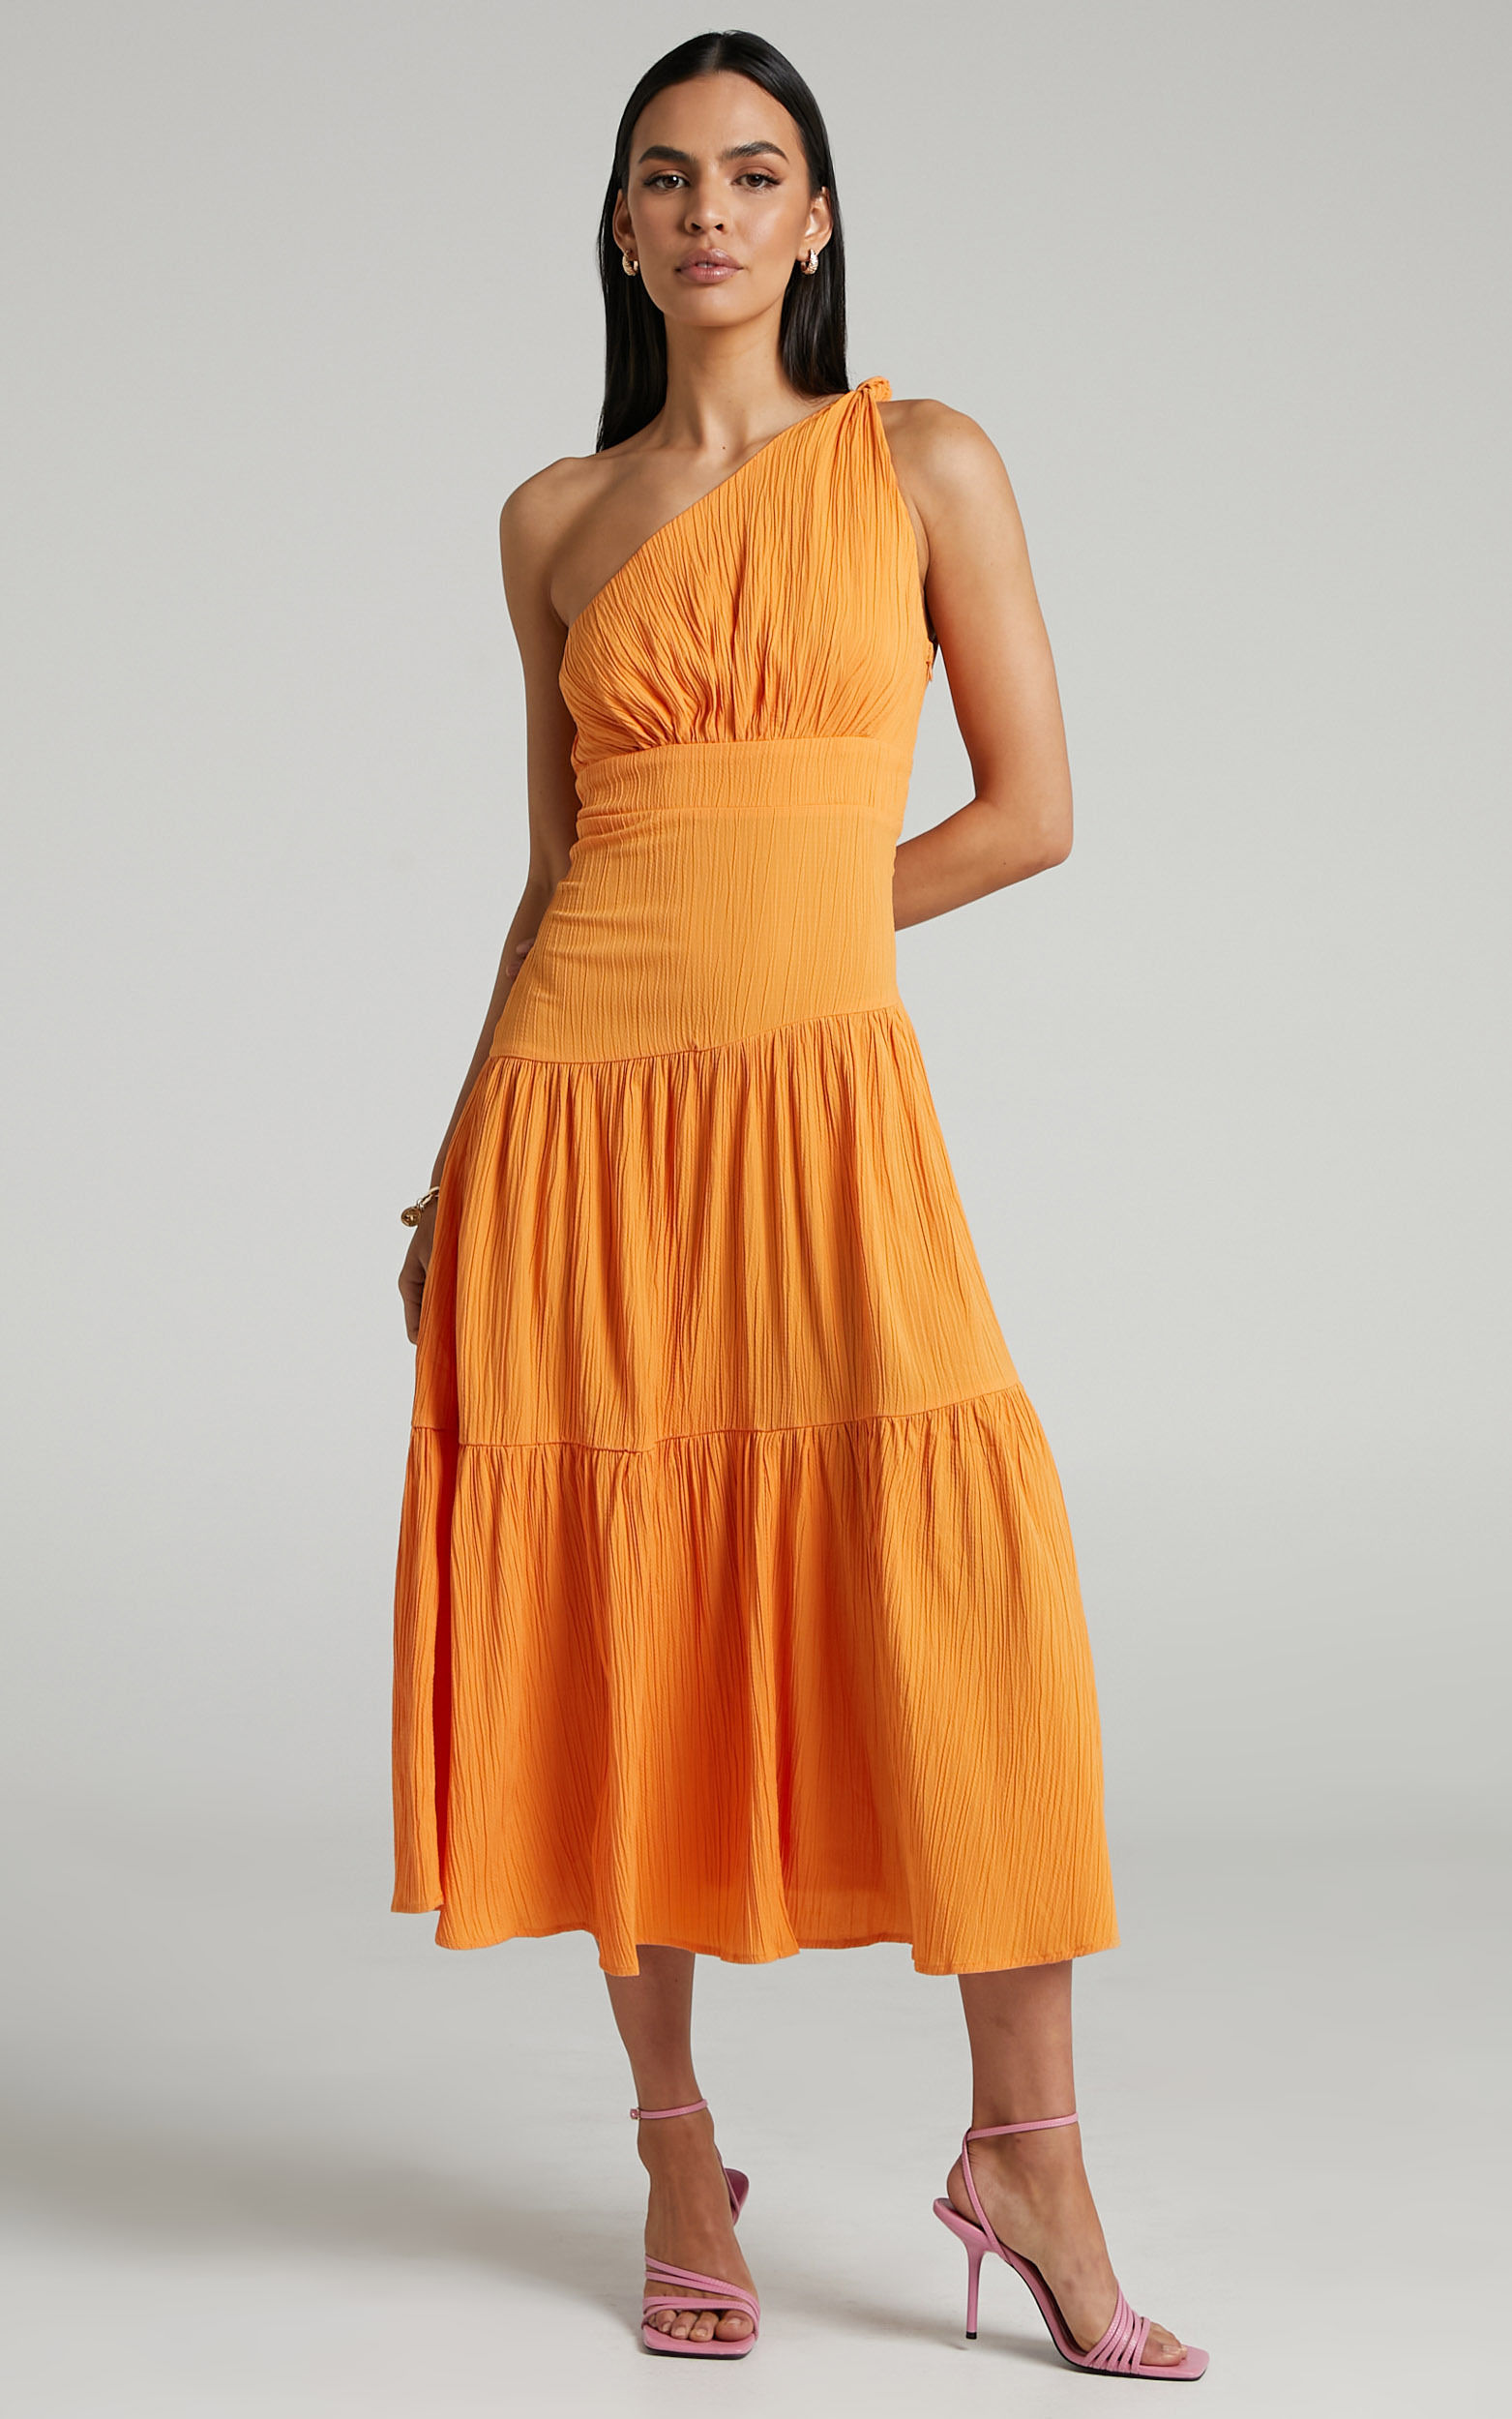 Celestia Tiered One Shoulder Midi Dress in Mango - 06, ORG1, hi-res image number null